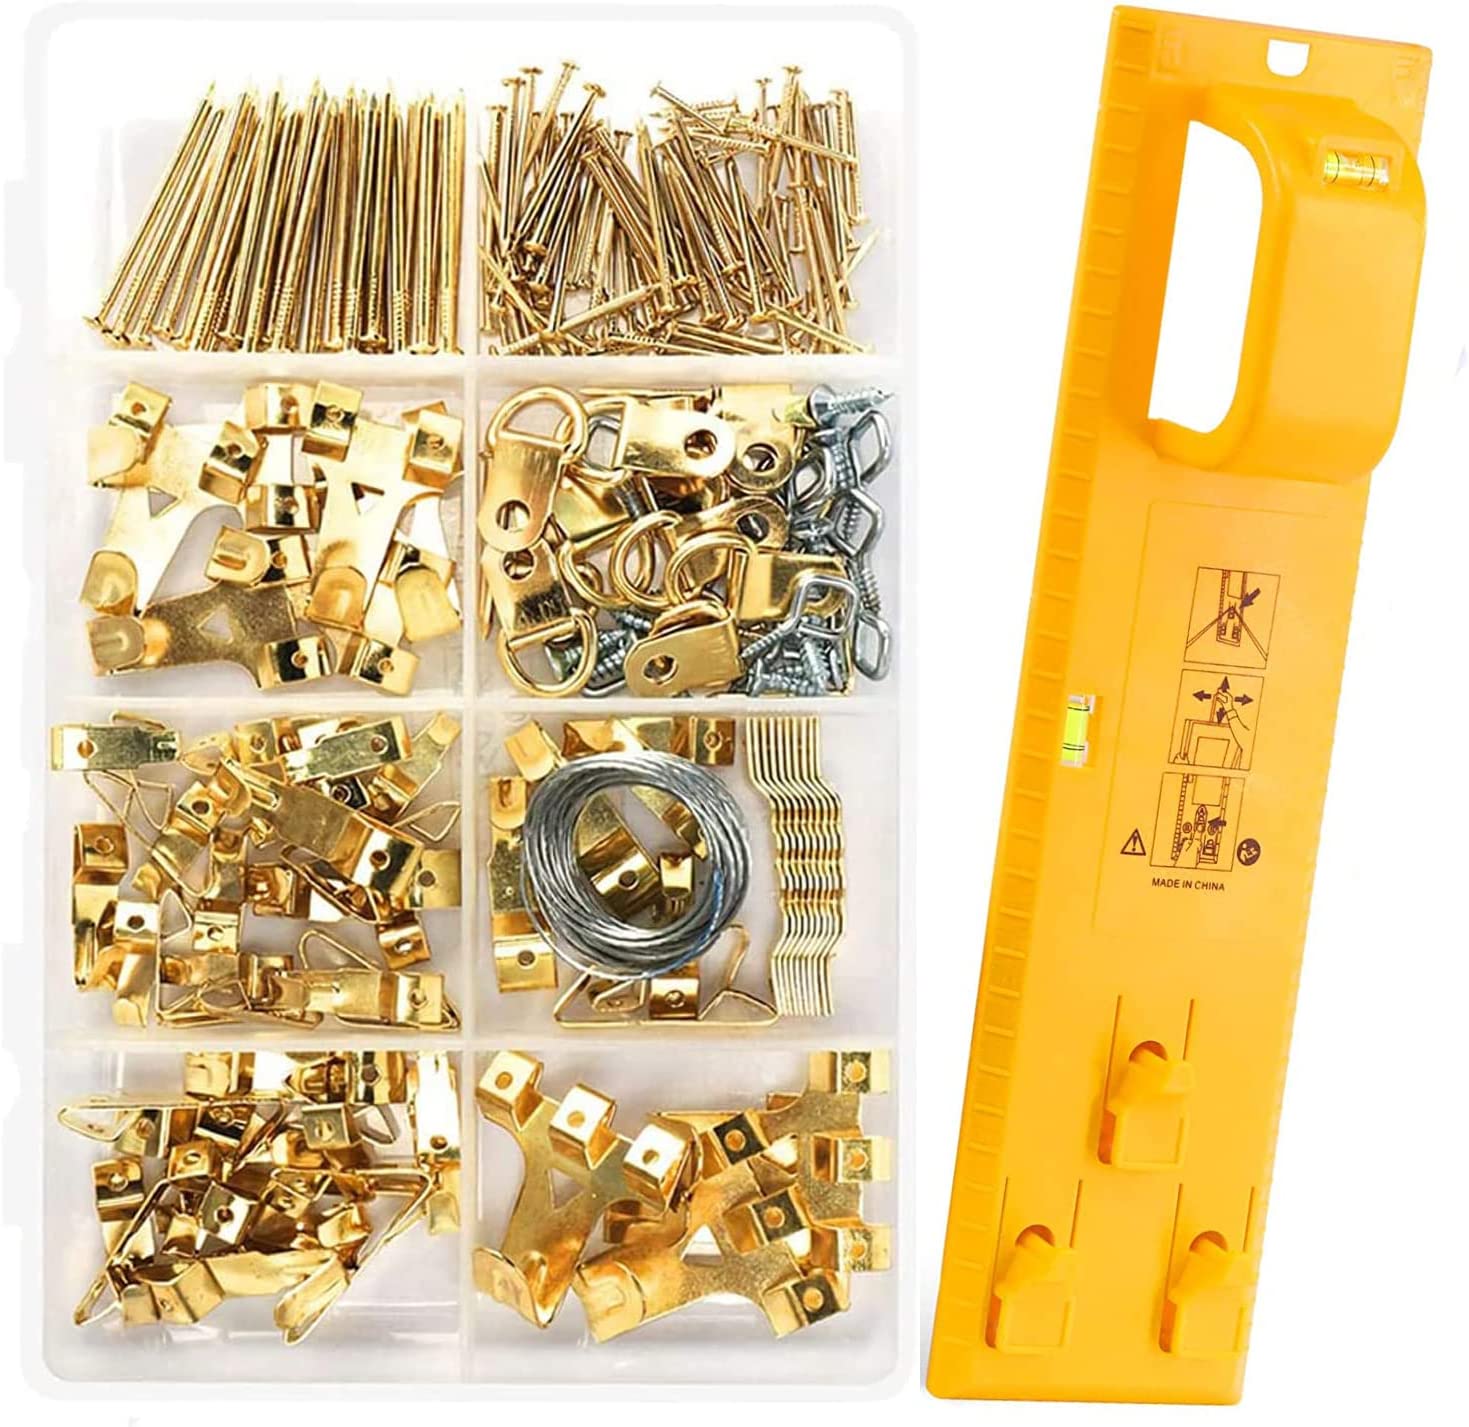 https://www.dontwasteyourmoney.com/wp-content/uploads/2022/04/dekava-leveling-all-in-one-picture-hanging-tool-set.jpg